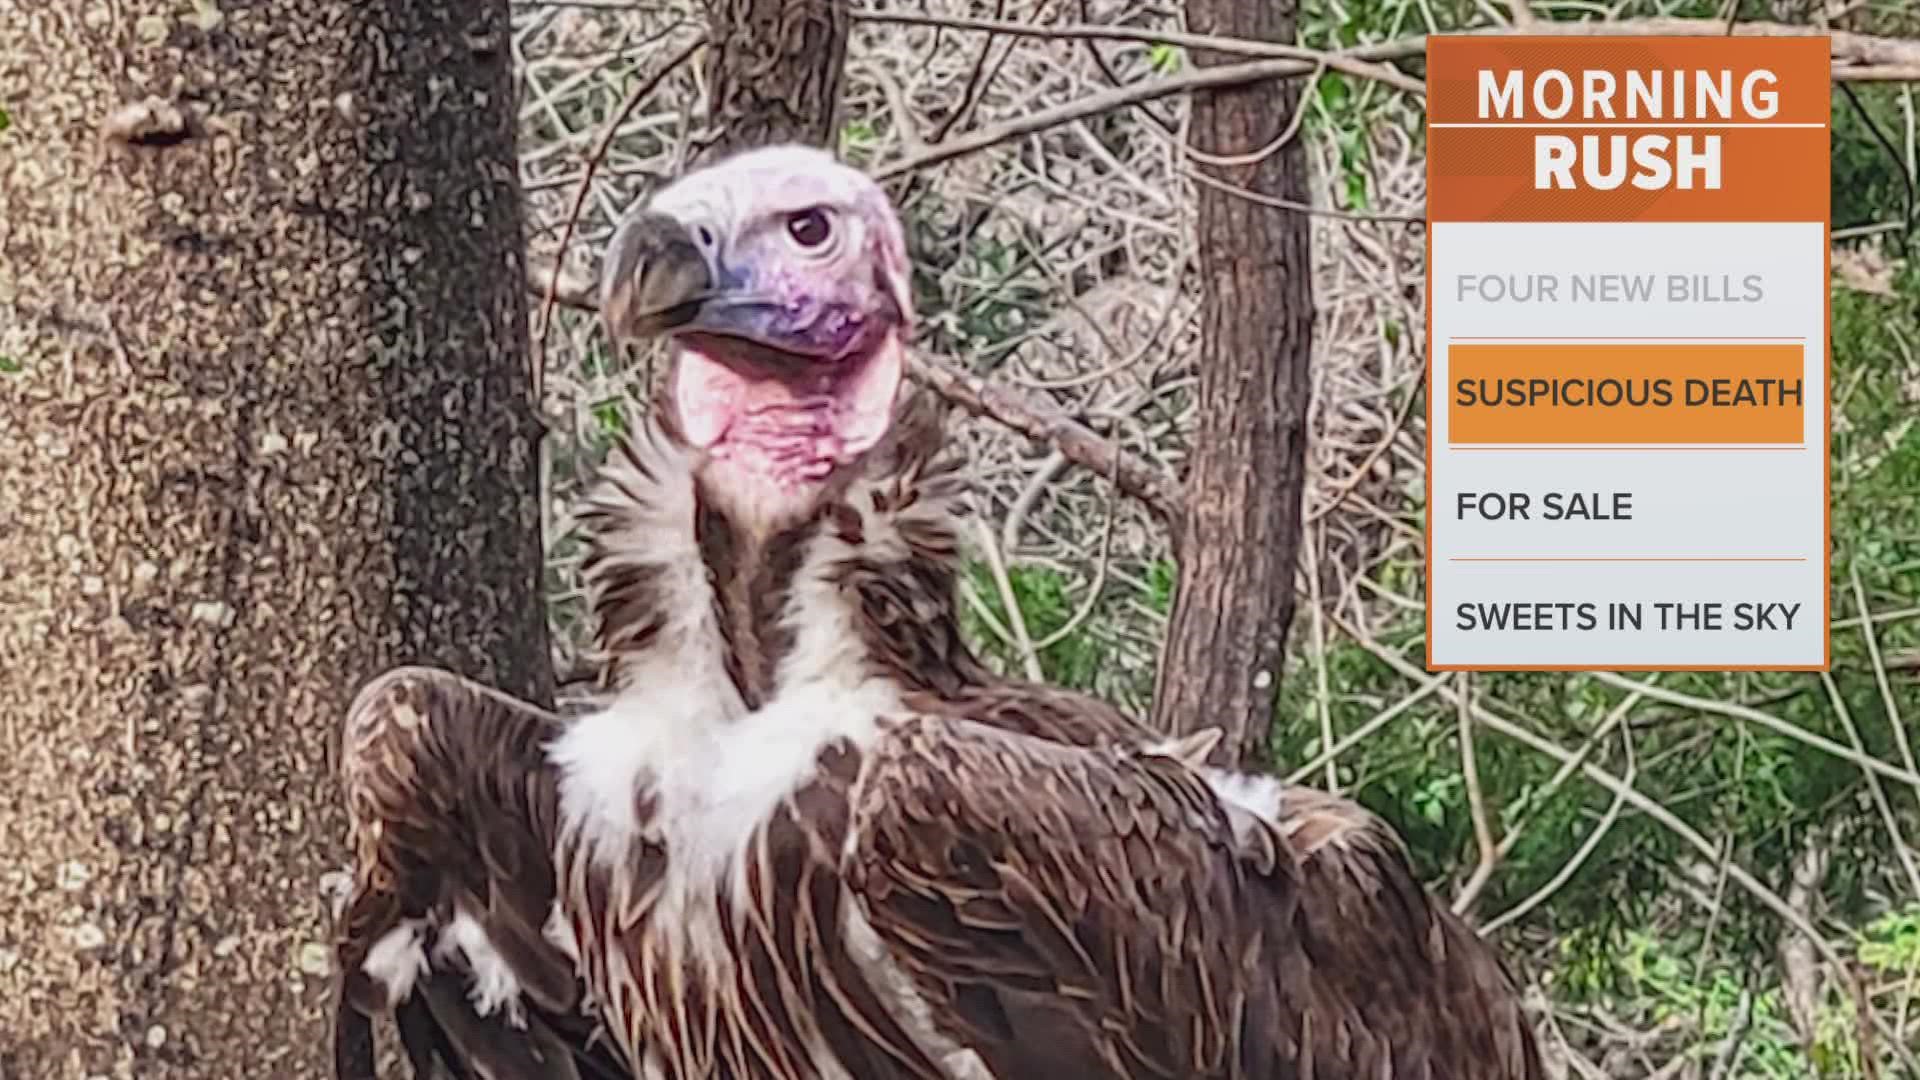 Pin, a lappet-faced vulture, had been at the Dallas Zoo for 33 years. He was found dead in a "suspicious" manner over the weekend.